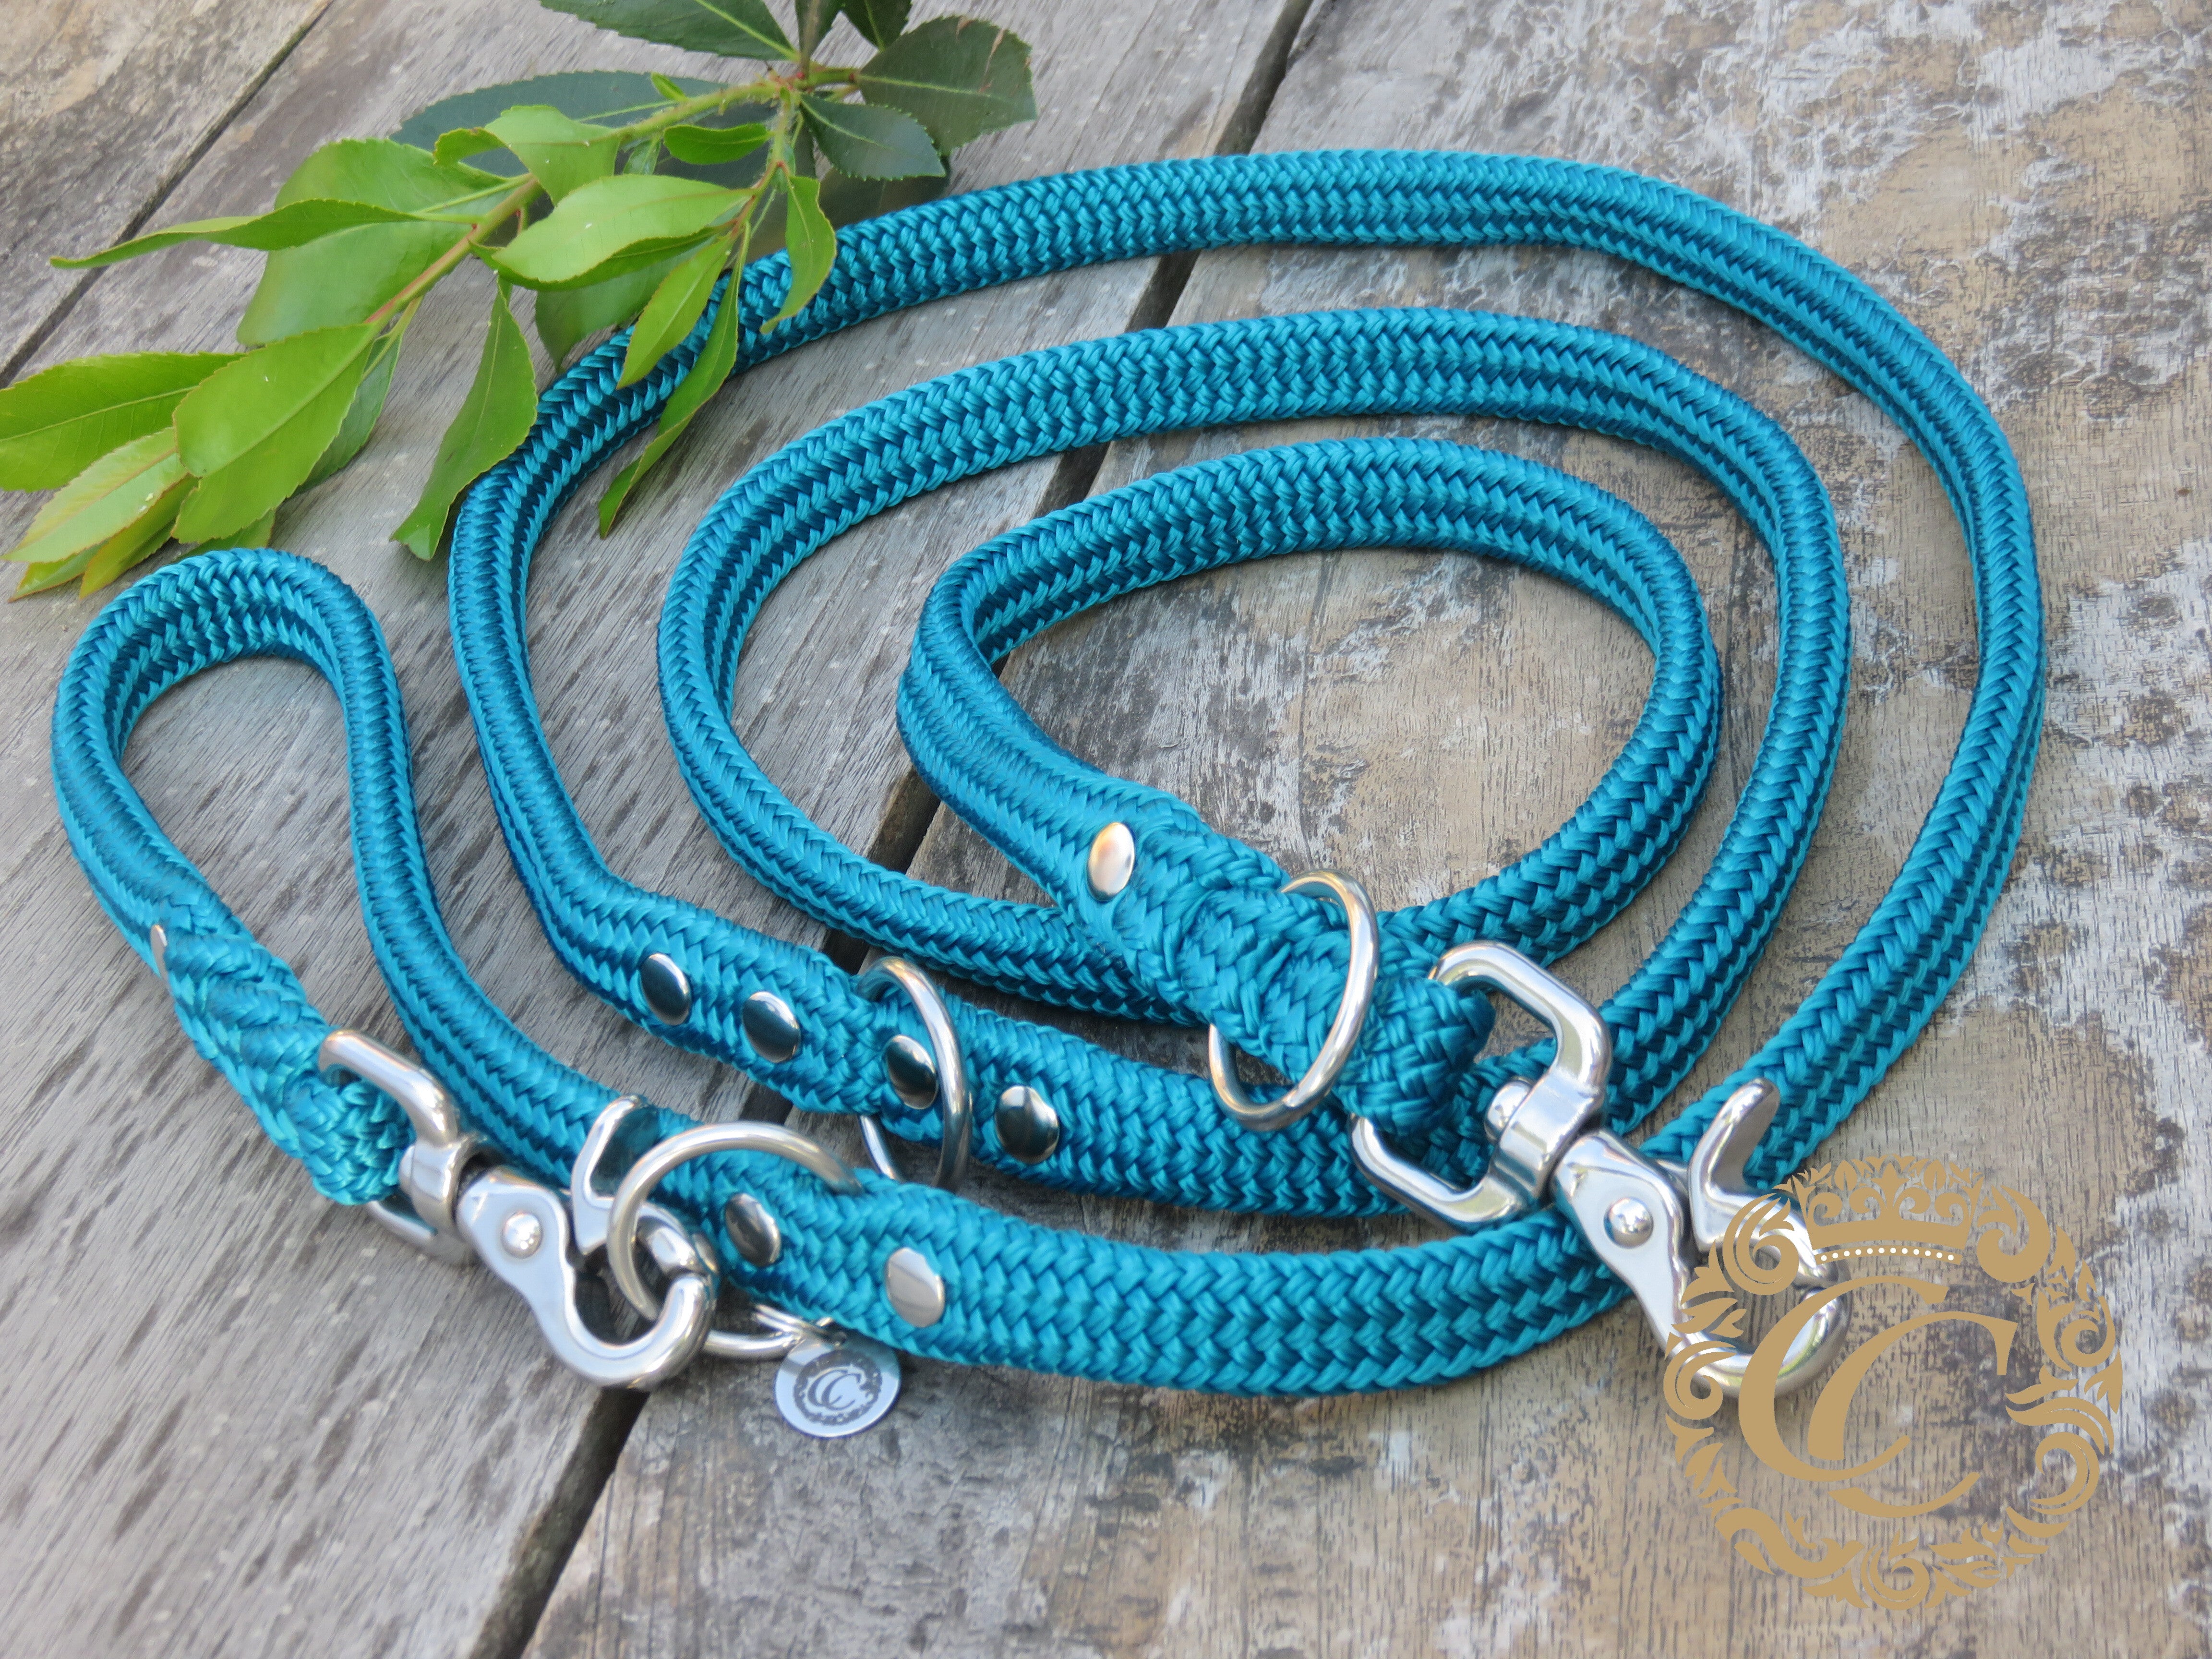 Dog leash adjustable custom made | Available in many colors Dog Leash | CollarCrafts | dog leash custom made | leash | dogleash | hands free dog leash | paracord dog leash | dog collar leash set optional | Handsfree leash | adjustable leash for dogs | Honden leibanden | collarcrafts